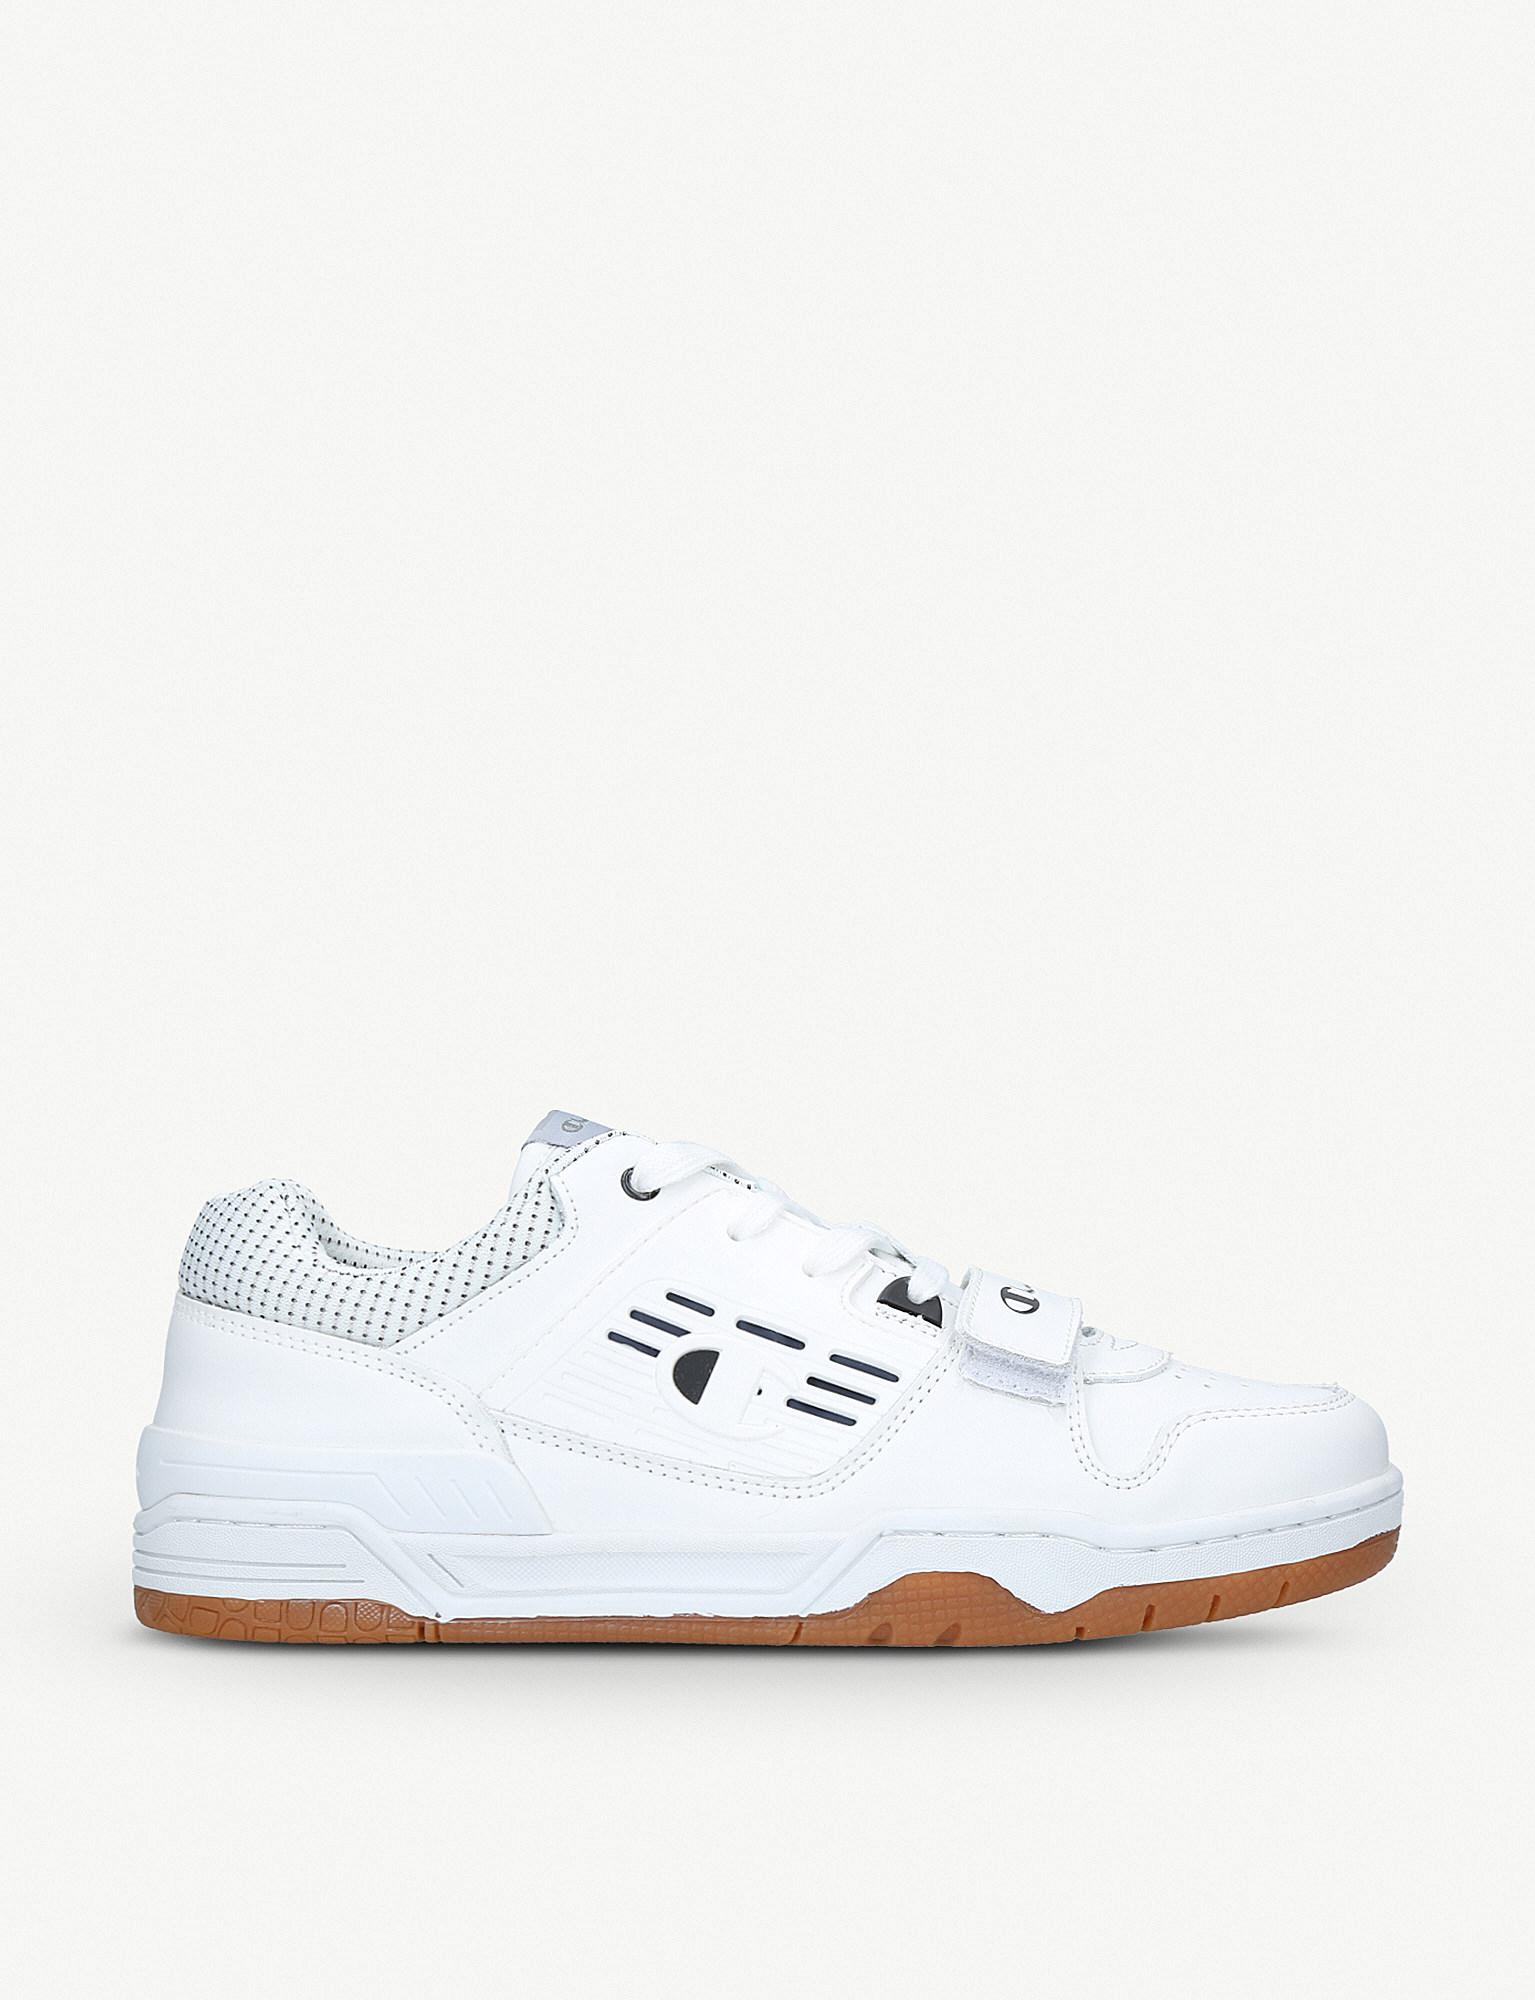 Low-top Trainers in White for Men - Lyst